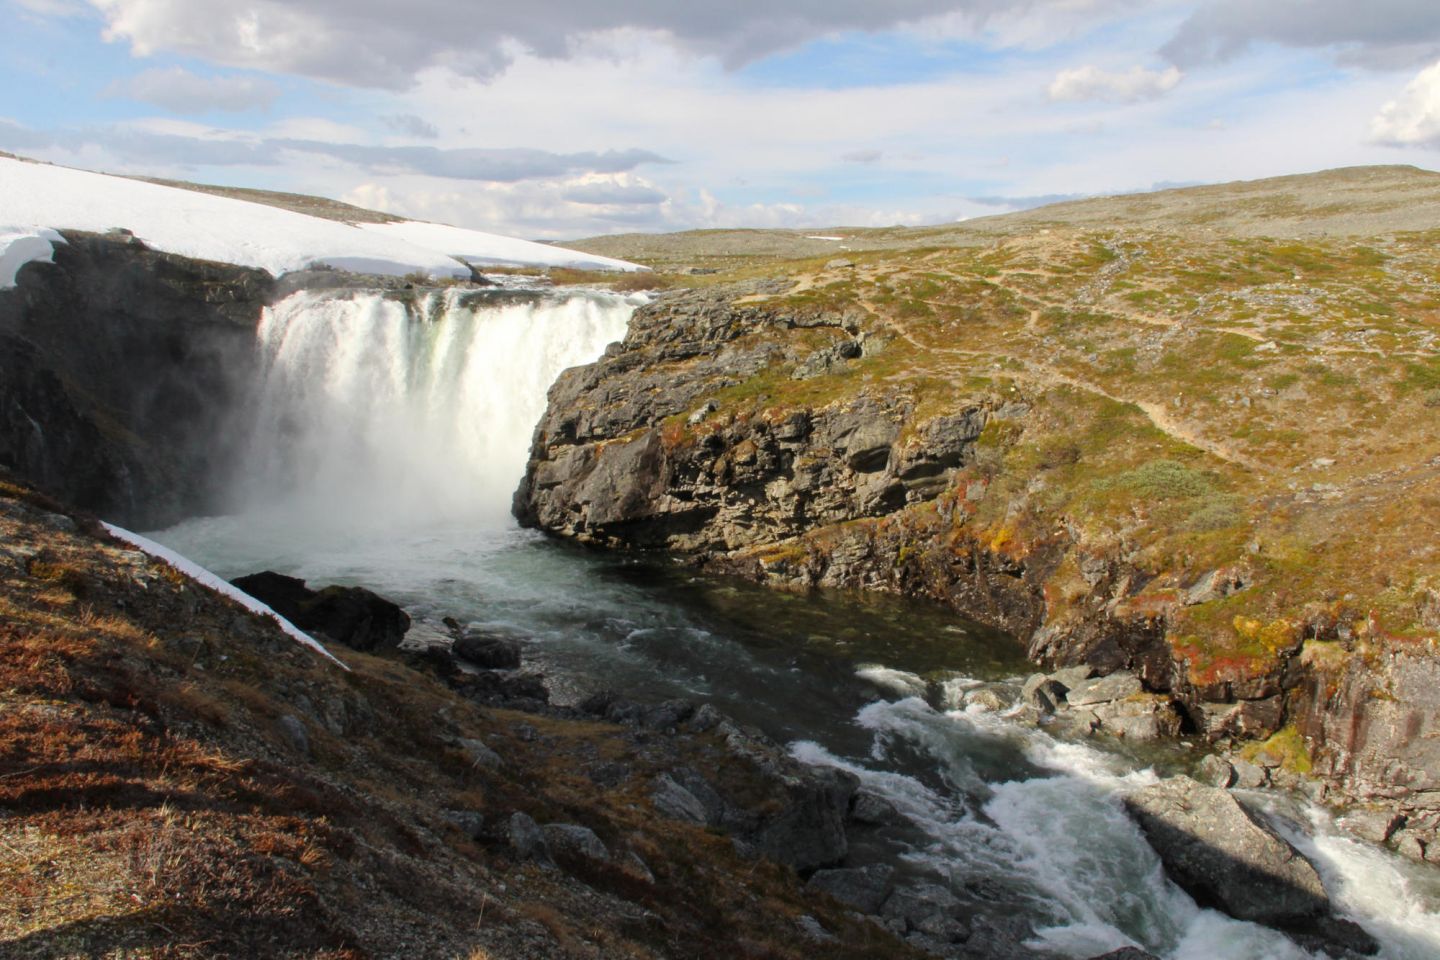 North Finland waterfall, during a fam trip in Finnish Lapland with location scout Lori Balton